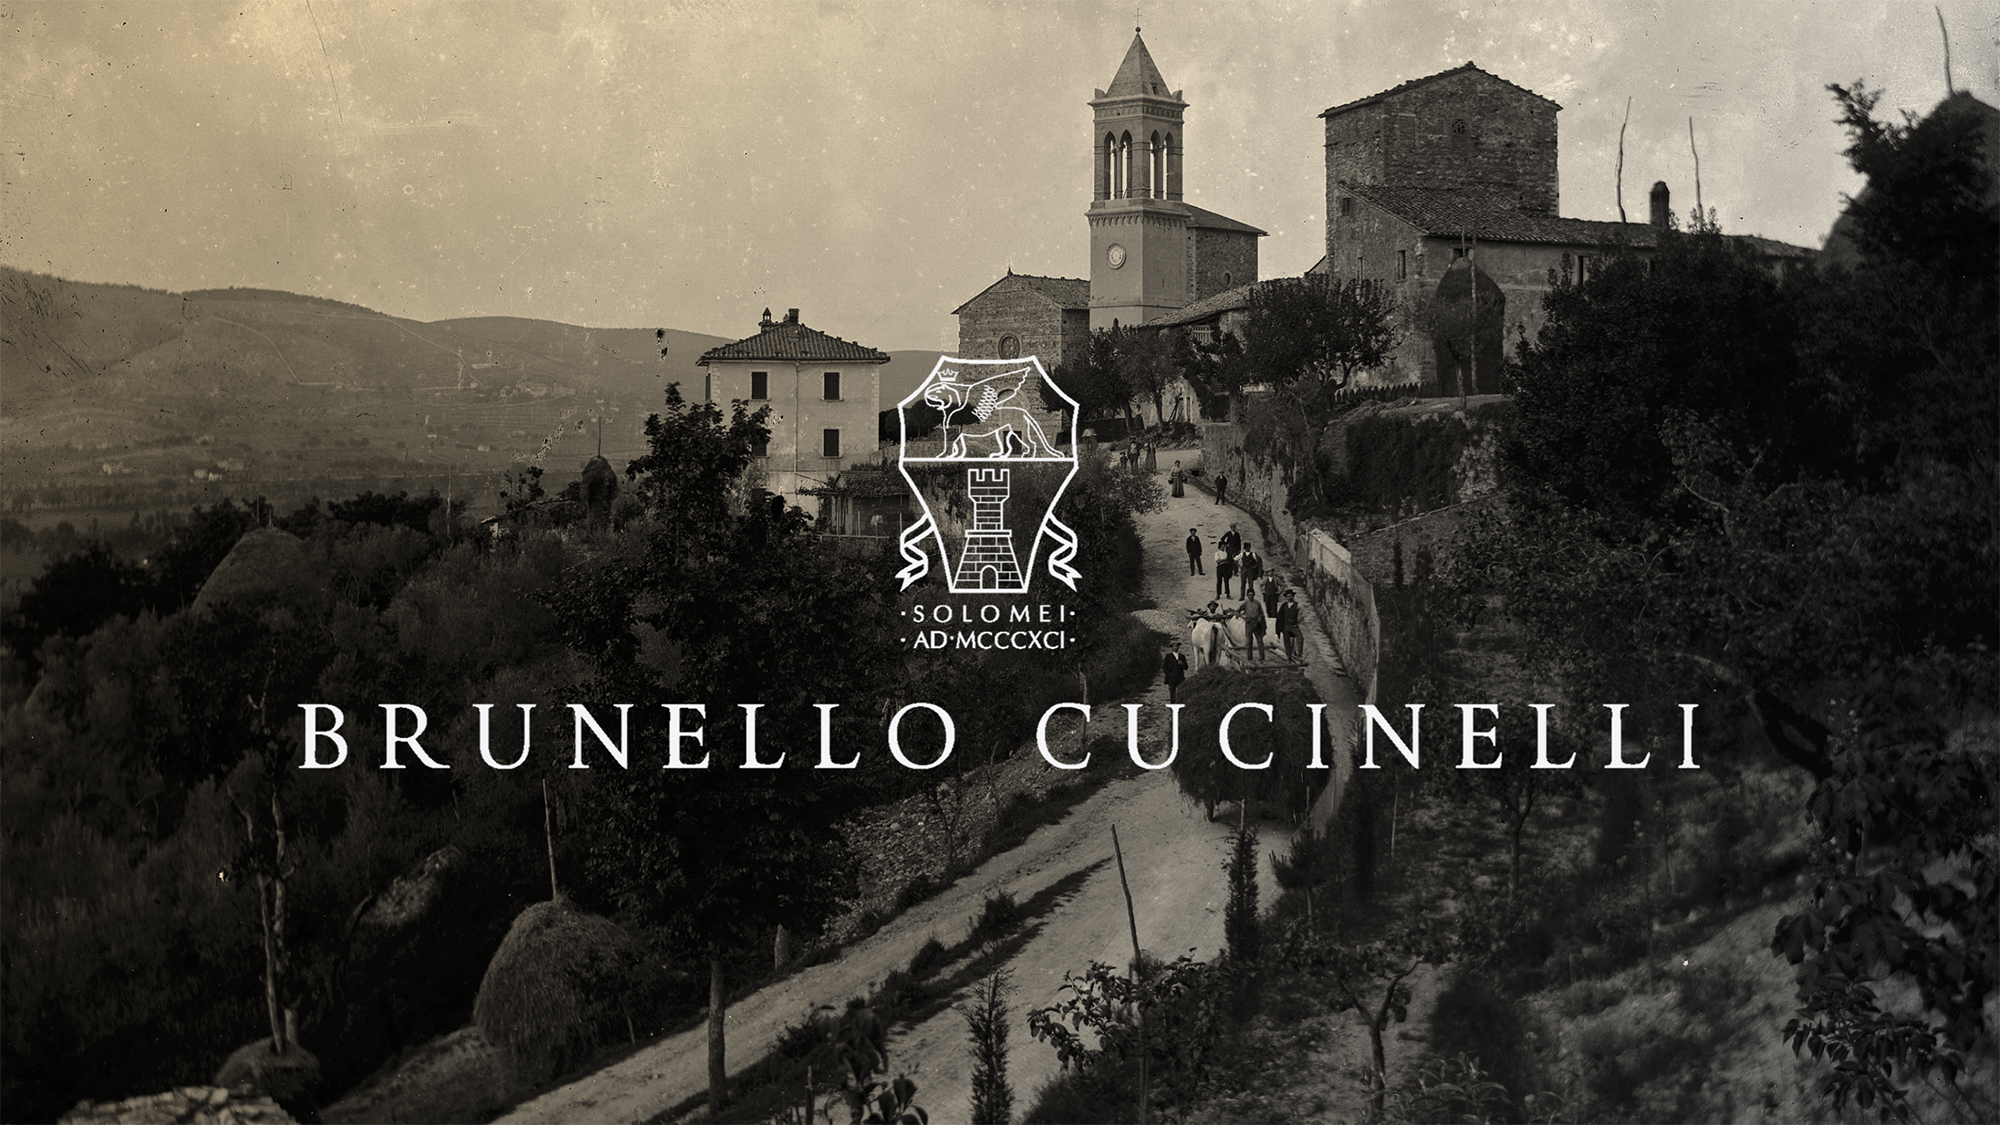 The Brunello Cucinelli Story: Combining Elegance and Ethics